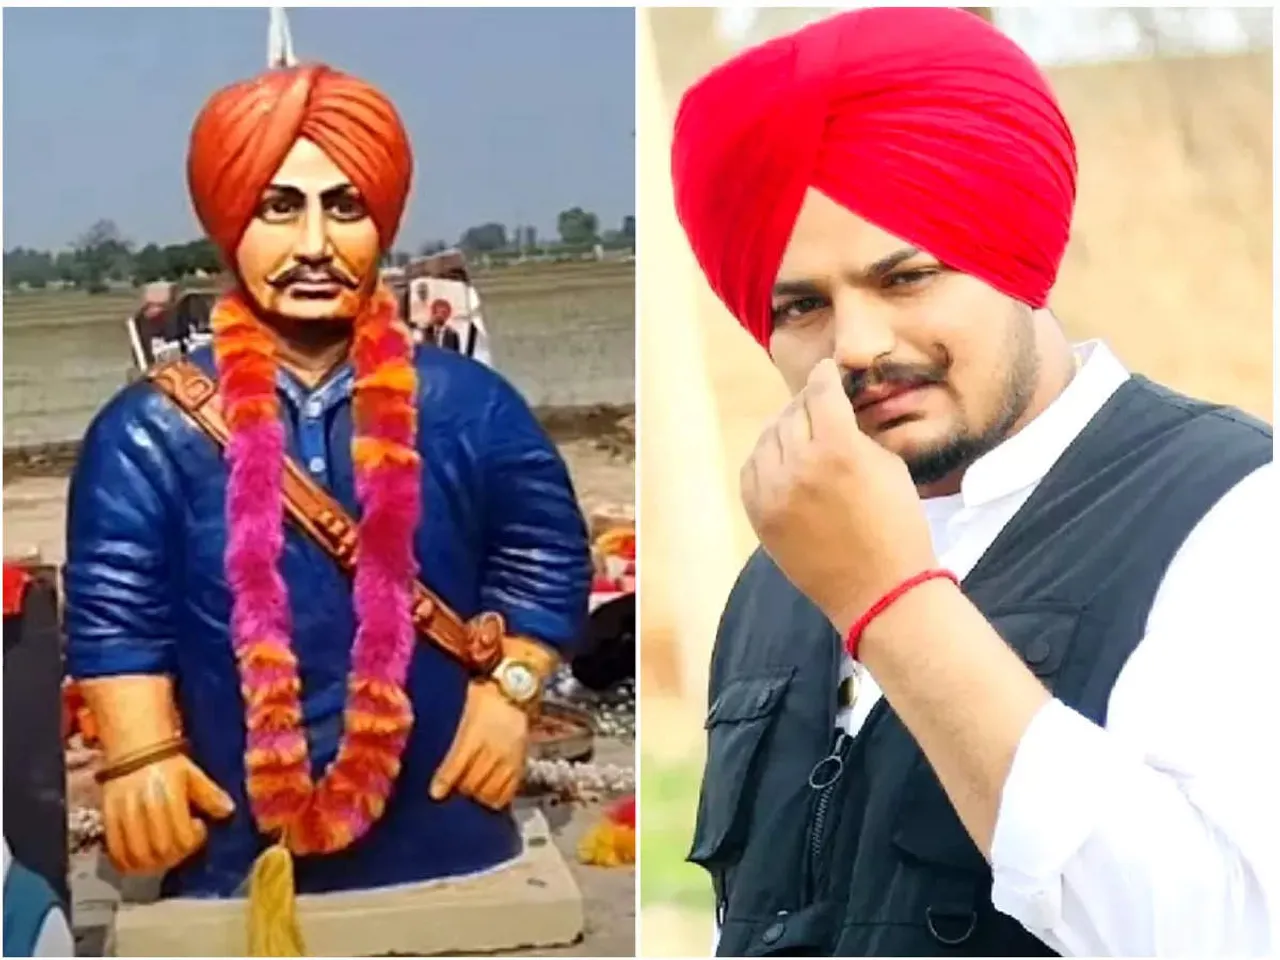 The music video has been shot at the same place where famous singer Sidhu Musewala was shot dead